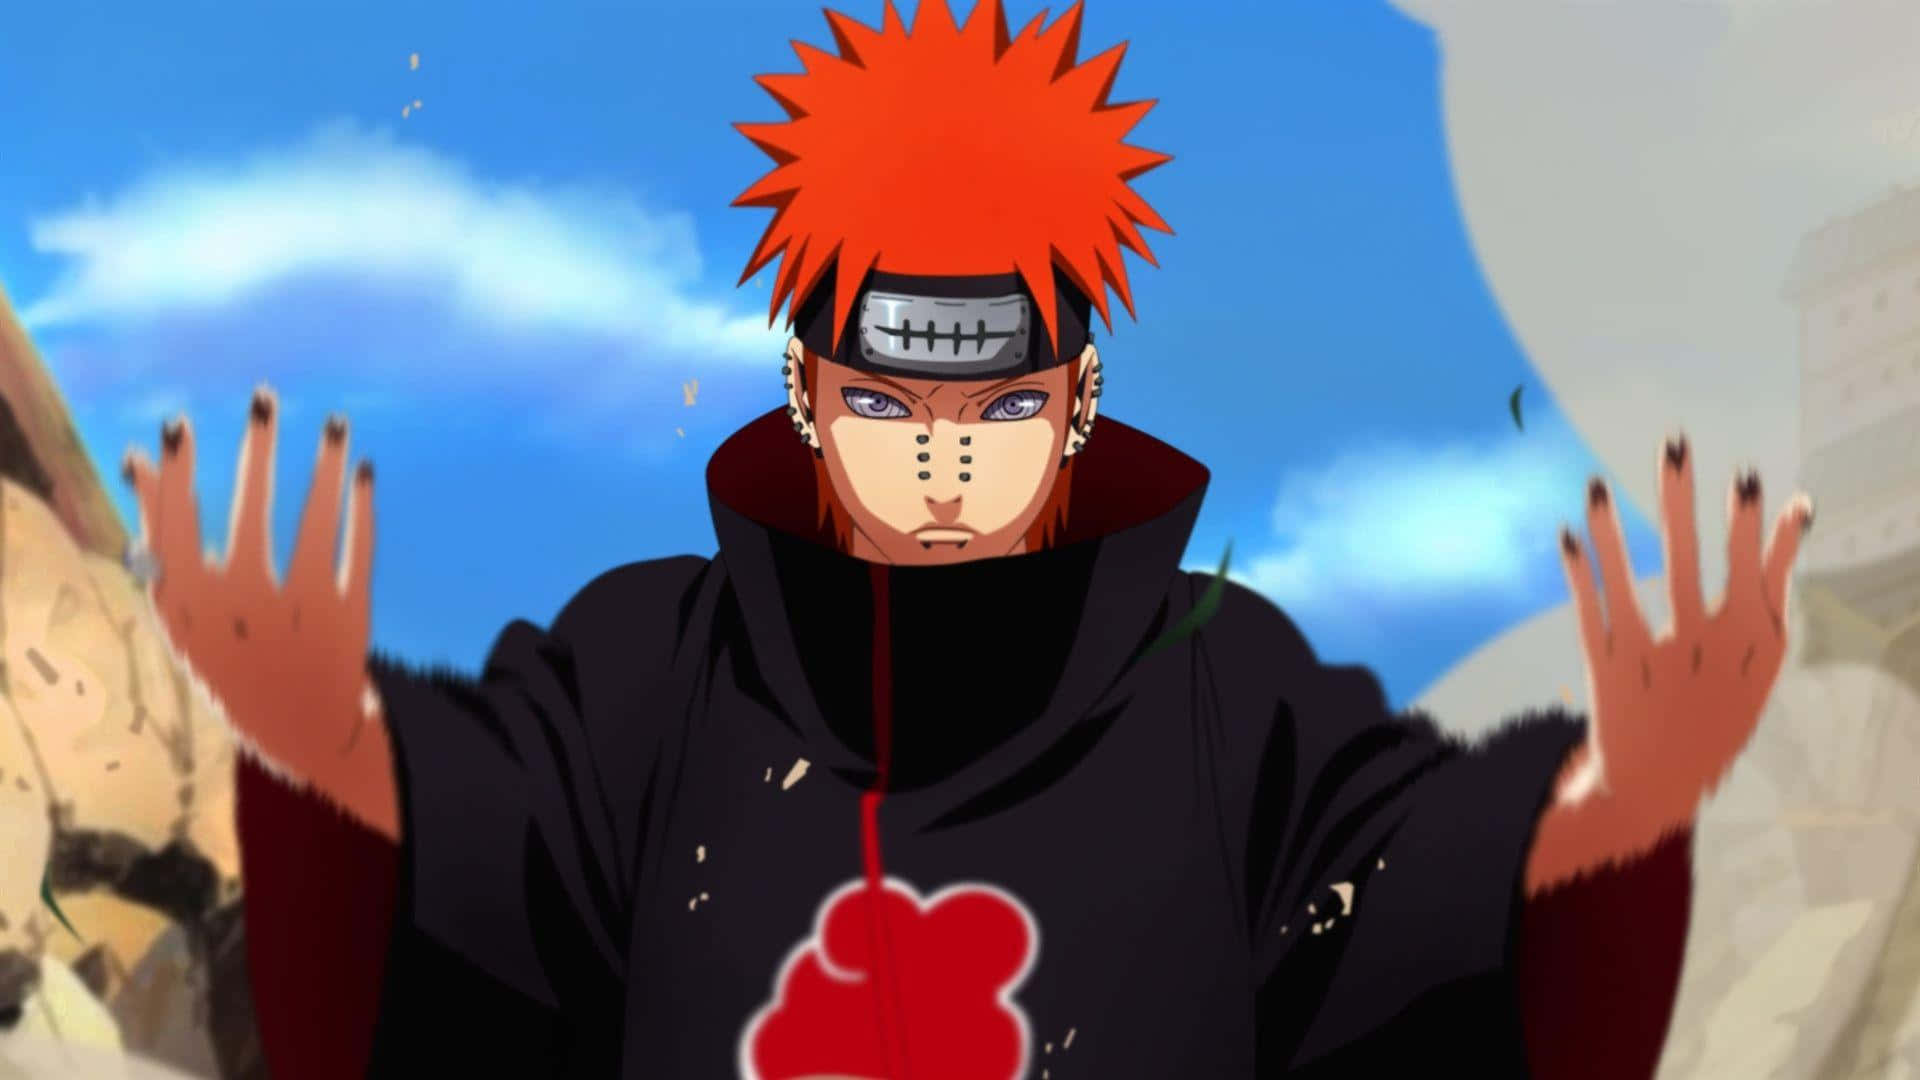 Pain from Akatsuki in a Pensive Moment" Wallpaper